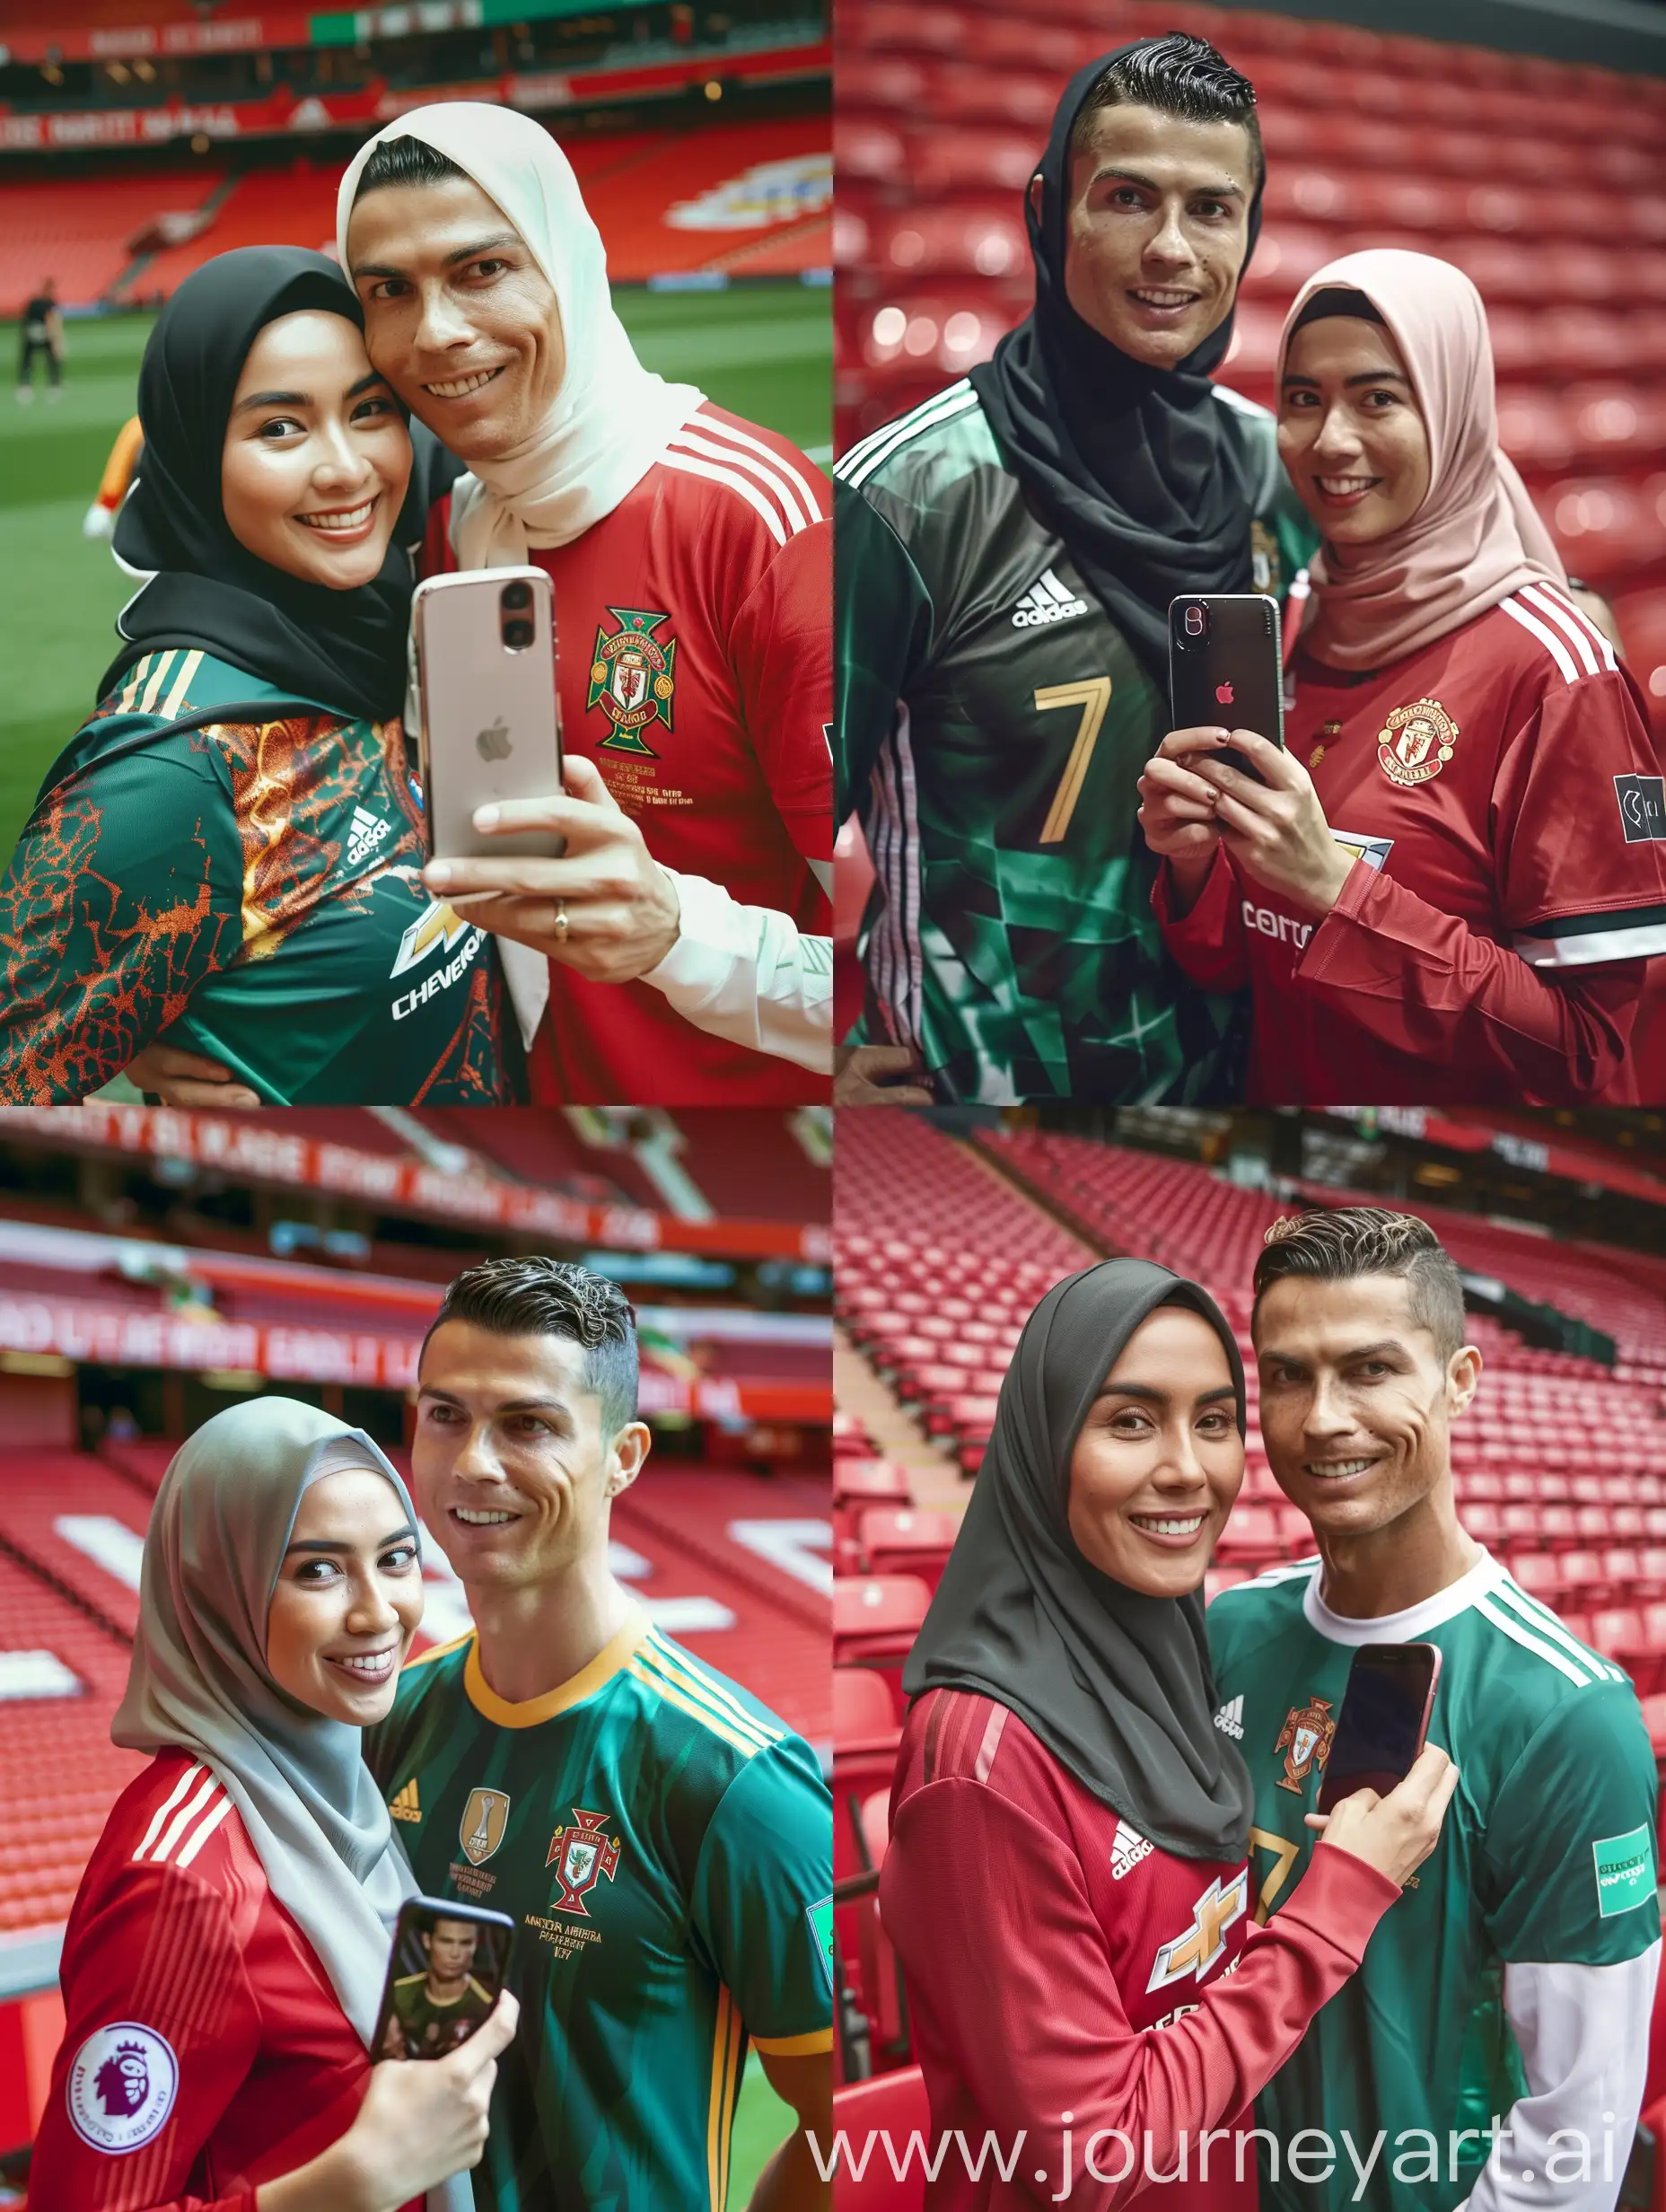 Indonesian-Woman-in-Manchester-United-Hijab-Taking-Photo-with-Cristiano-Ronaldo-at-Old-Trafford-Stadium